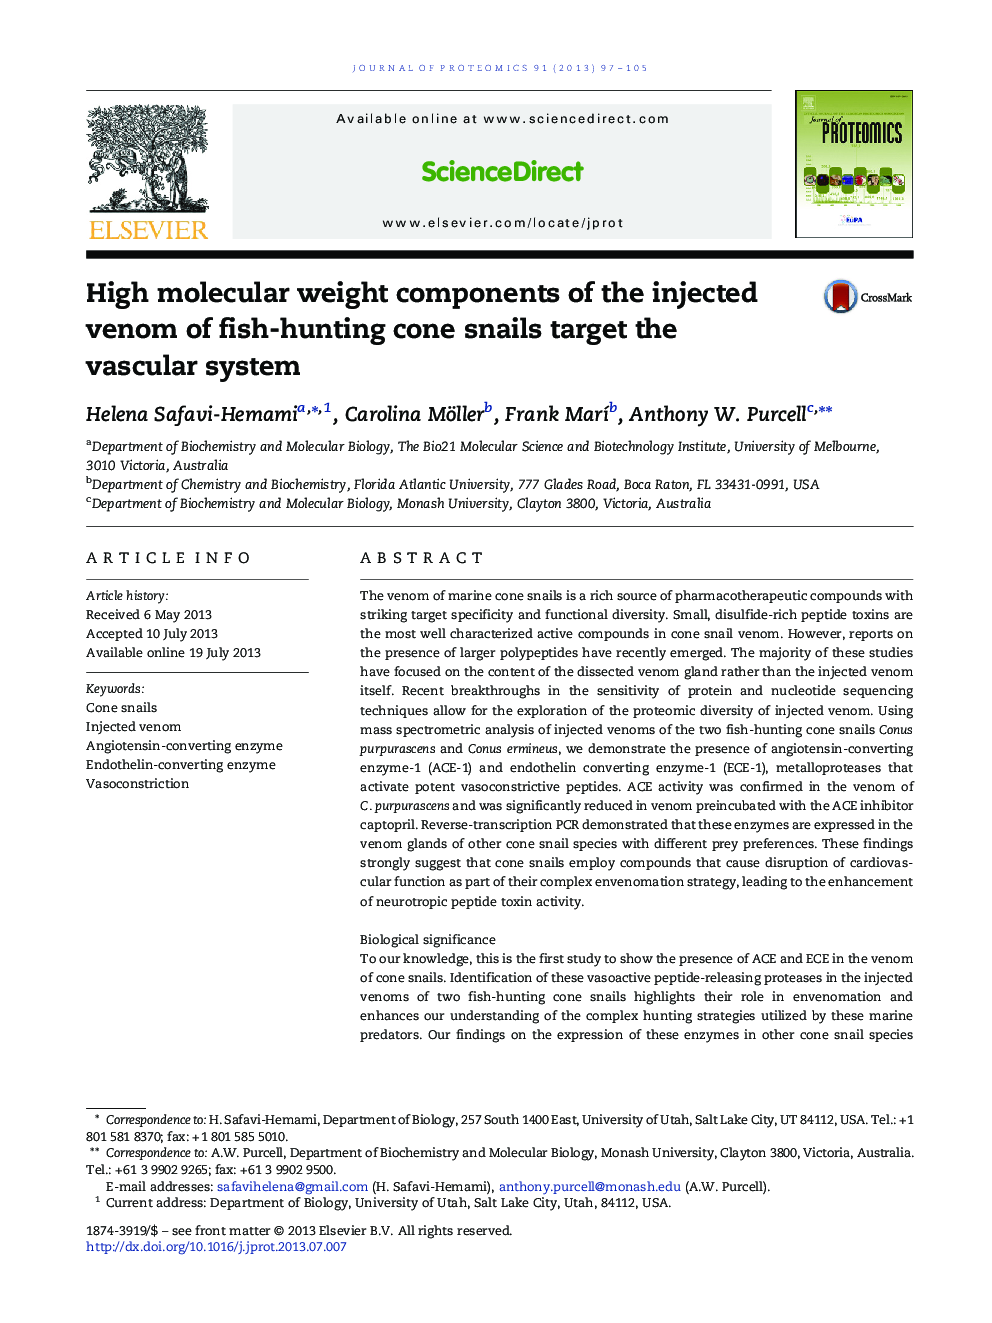 High molecular weight components of the injected venom of fish-hunting cone snails target the vascular system